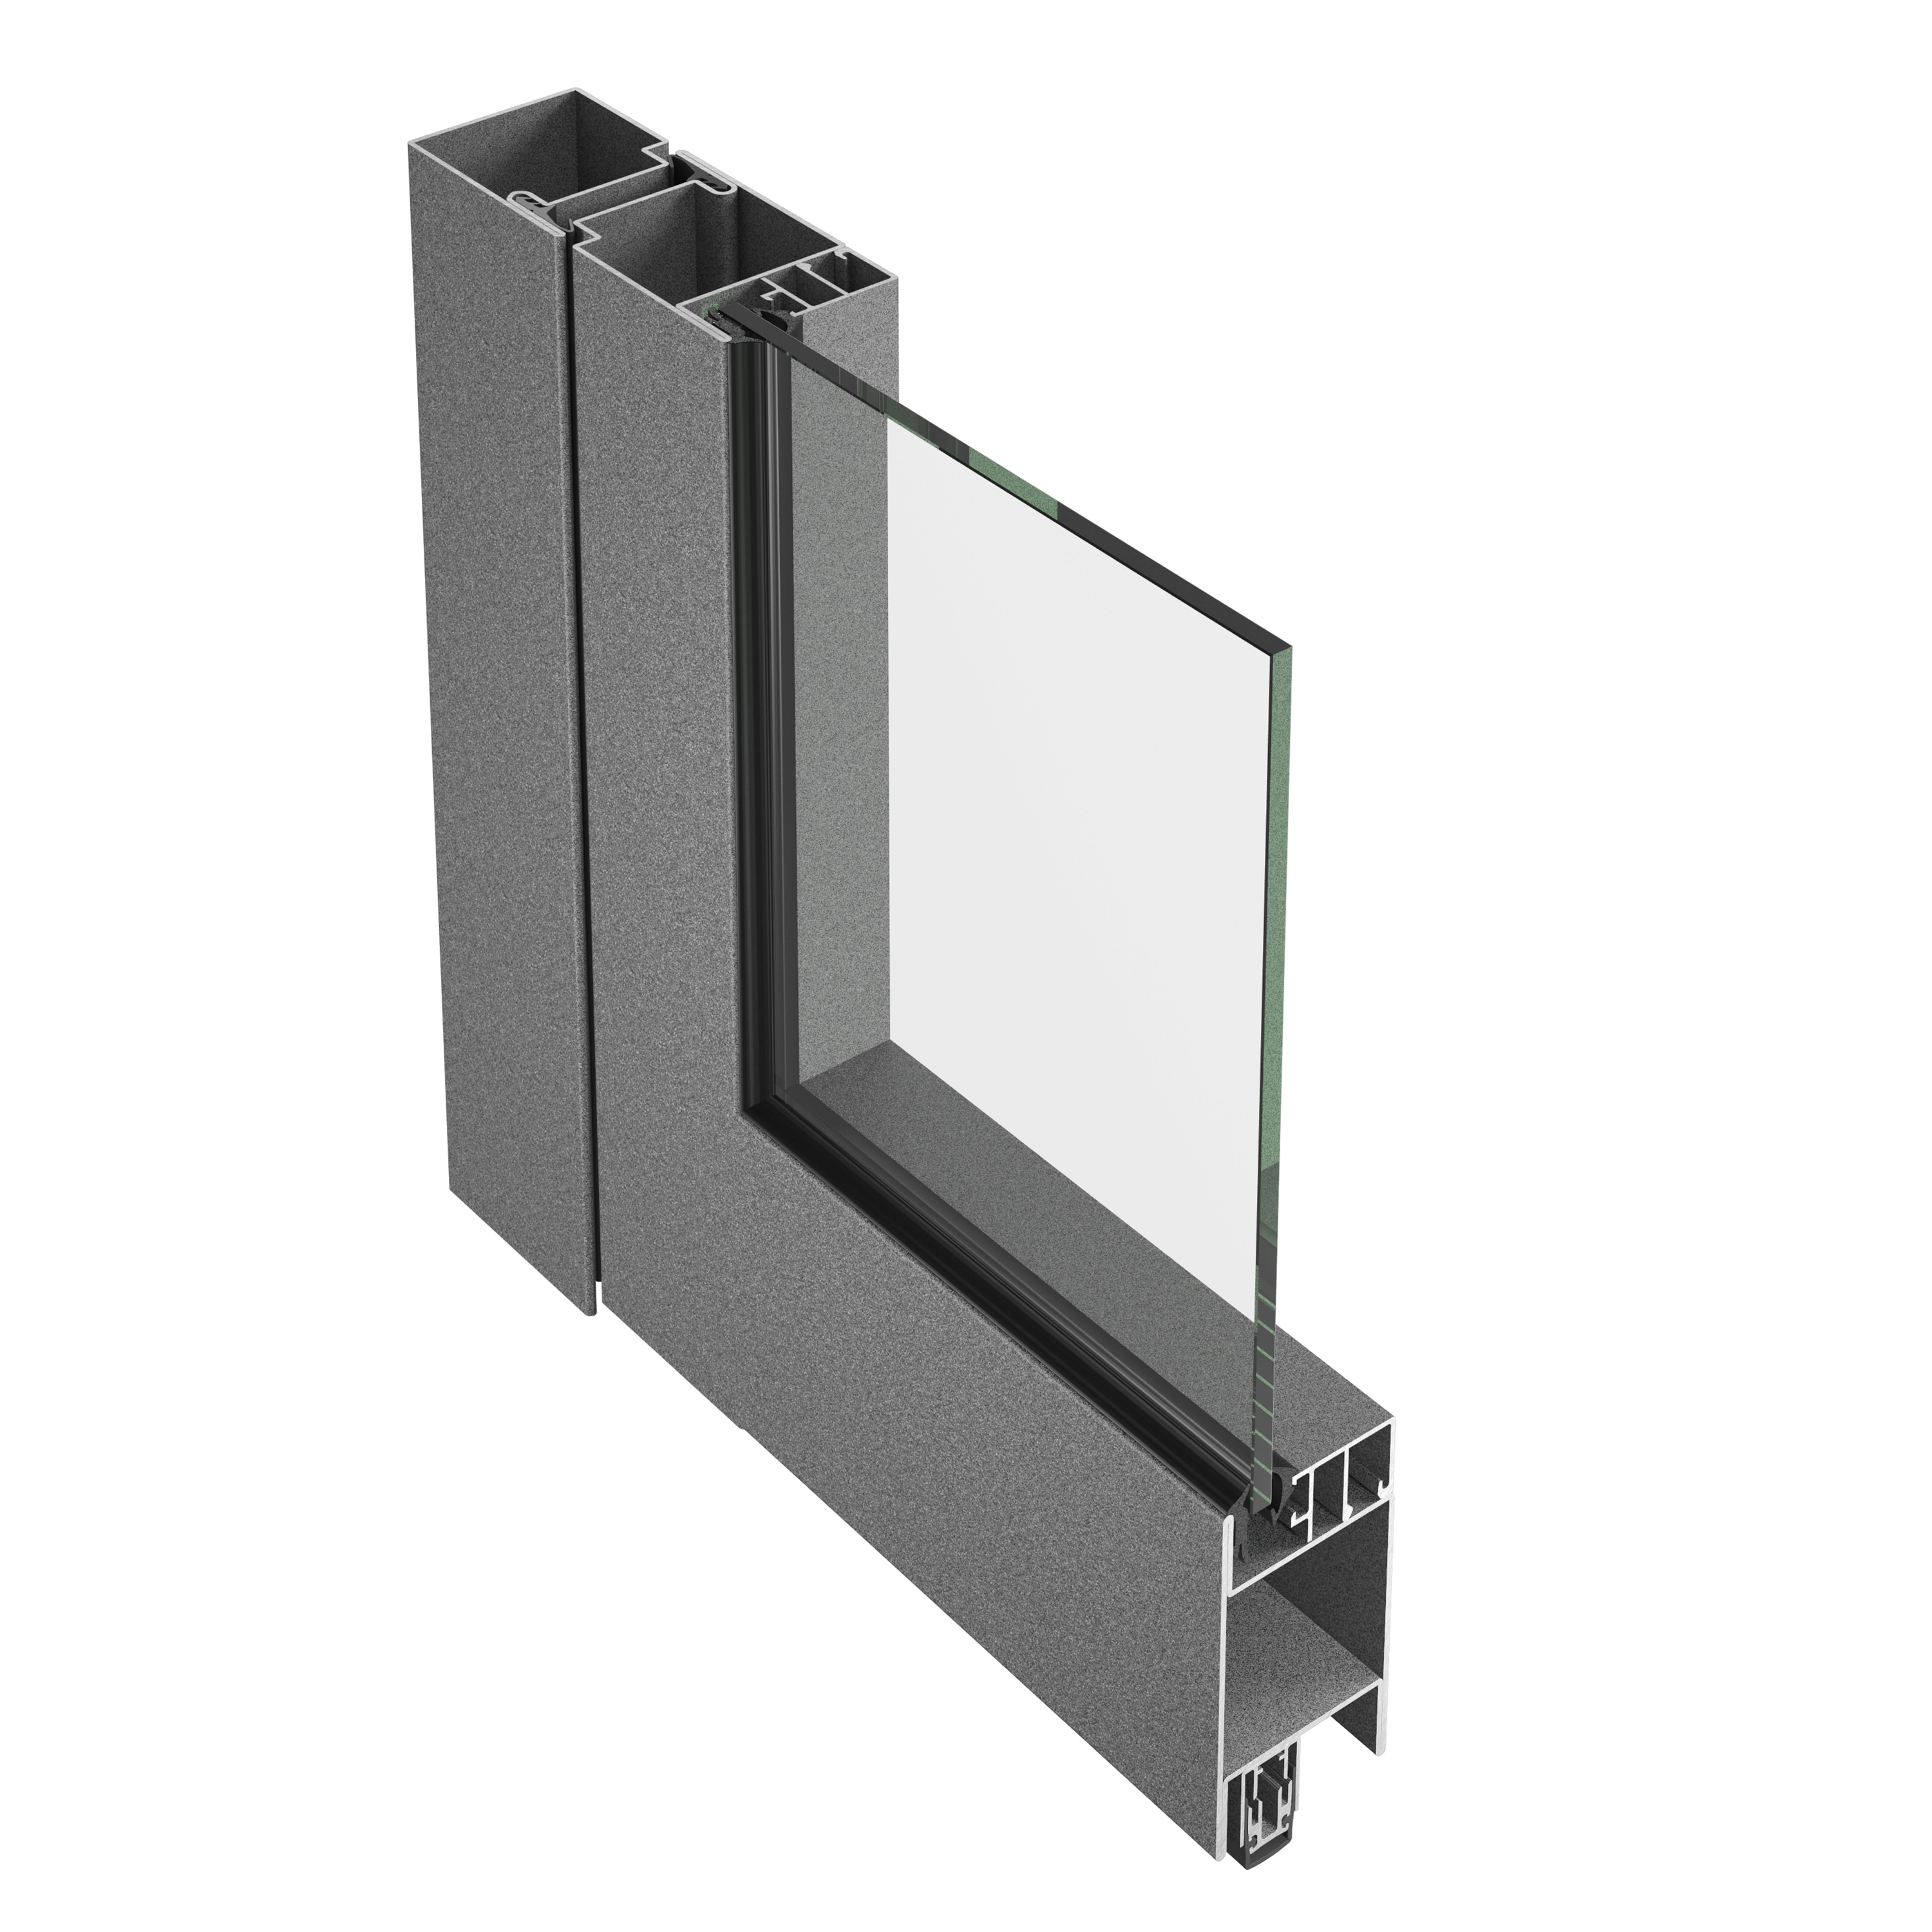 Smoke control doors and smoke control partitions – Jansen-Economy 50 RS